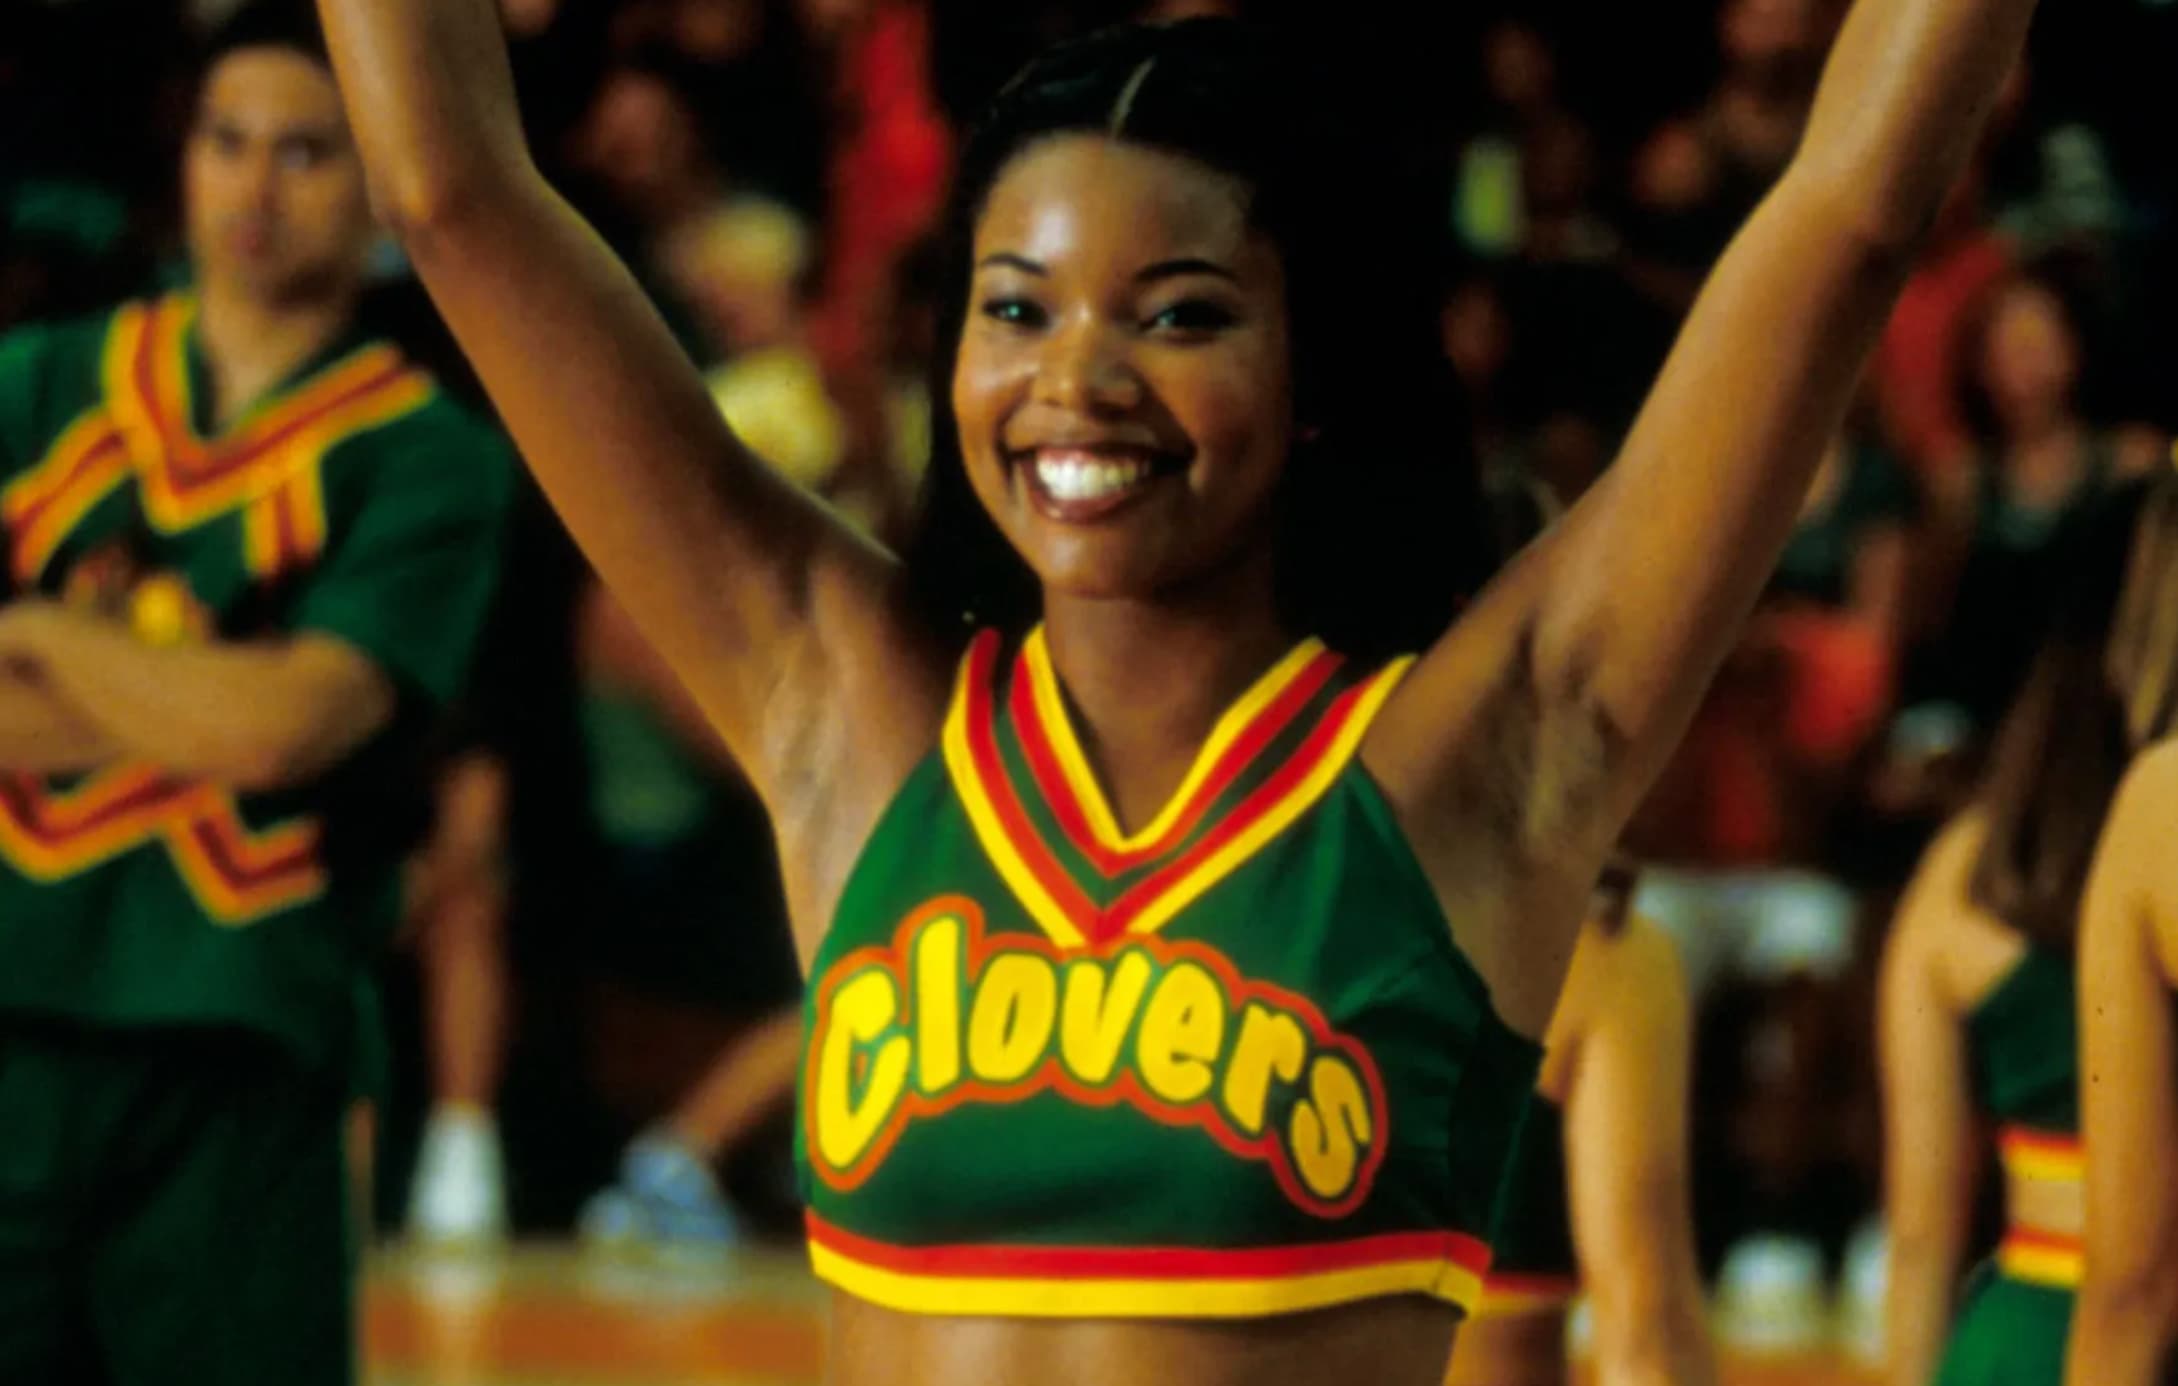 bring it on gabrielle union - Clovers